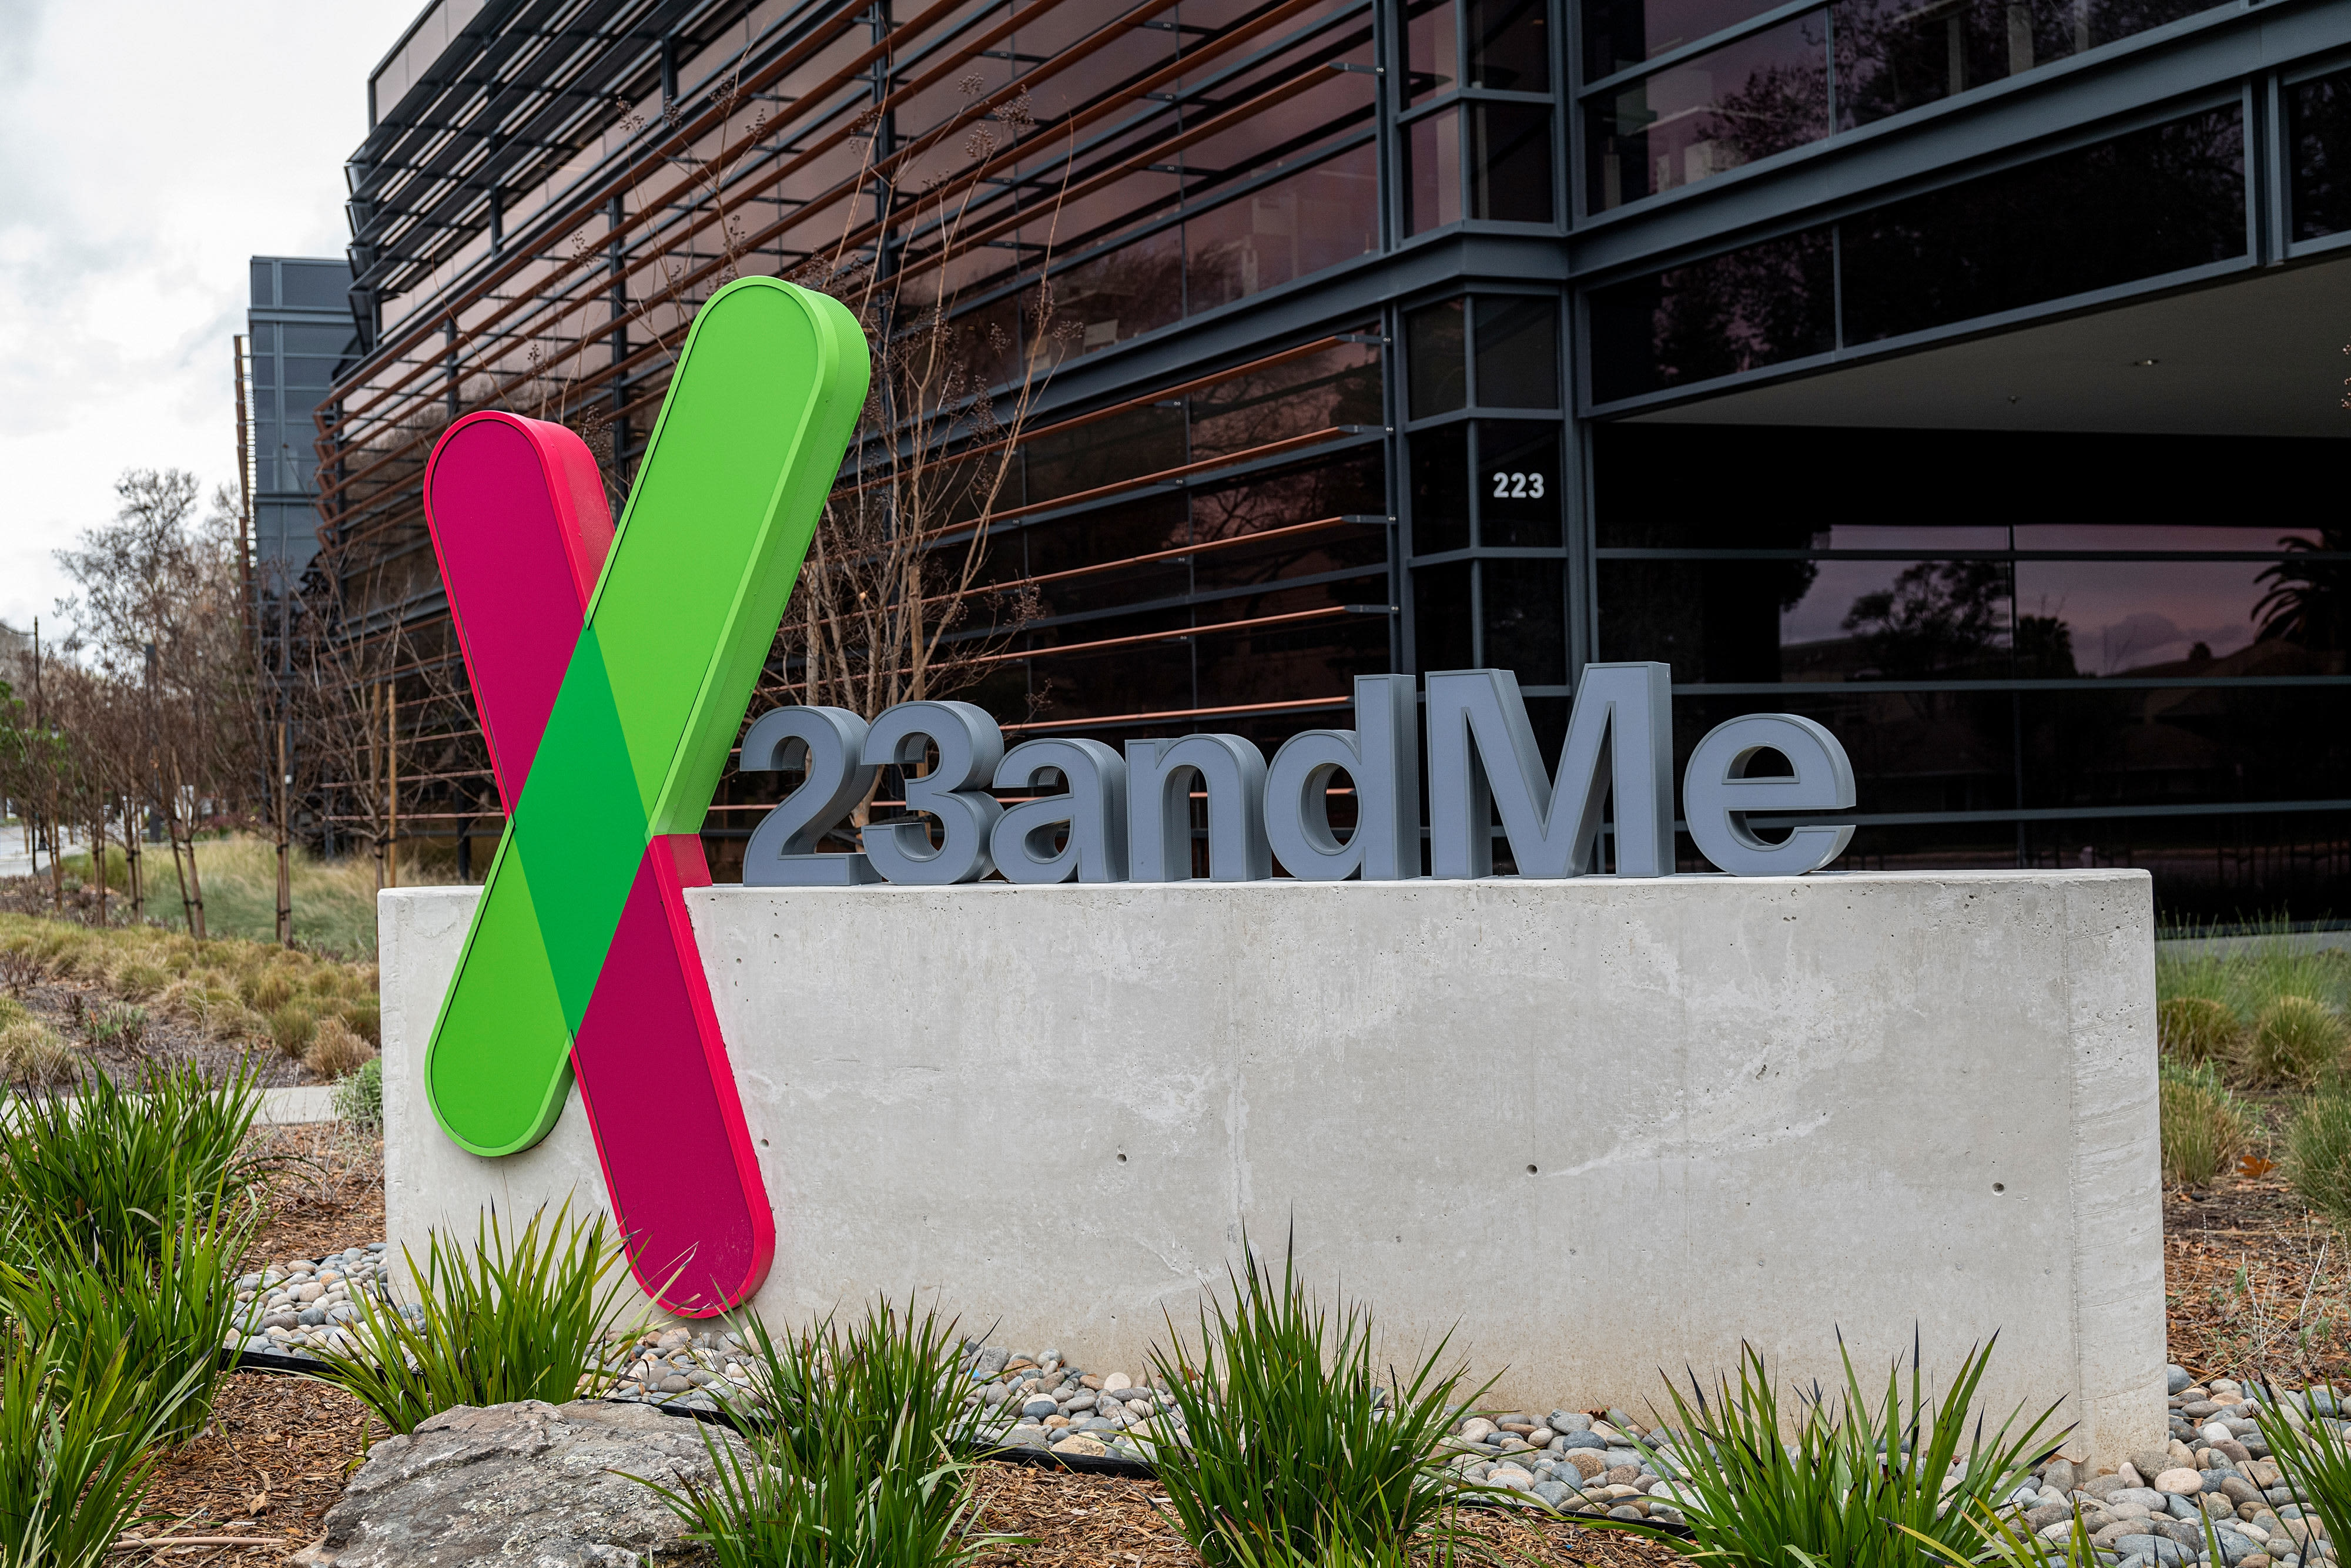 DNA testing company 23andMe to go public through SPAC supported by Branson